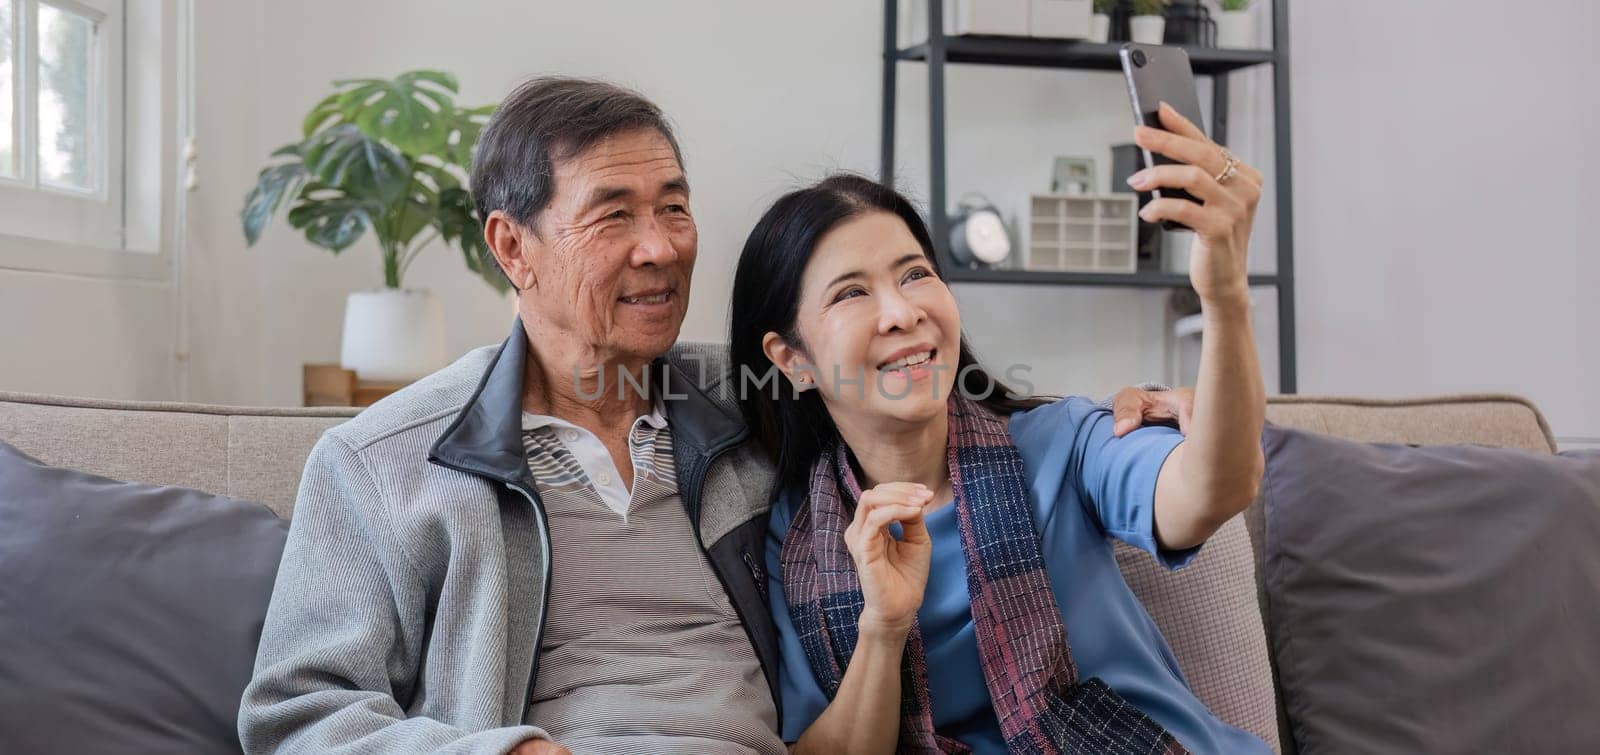 Senior couple in their 60s video chat greeting each other on vacation Have fun together on the sofa in the living room. by wichayada